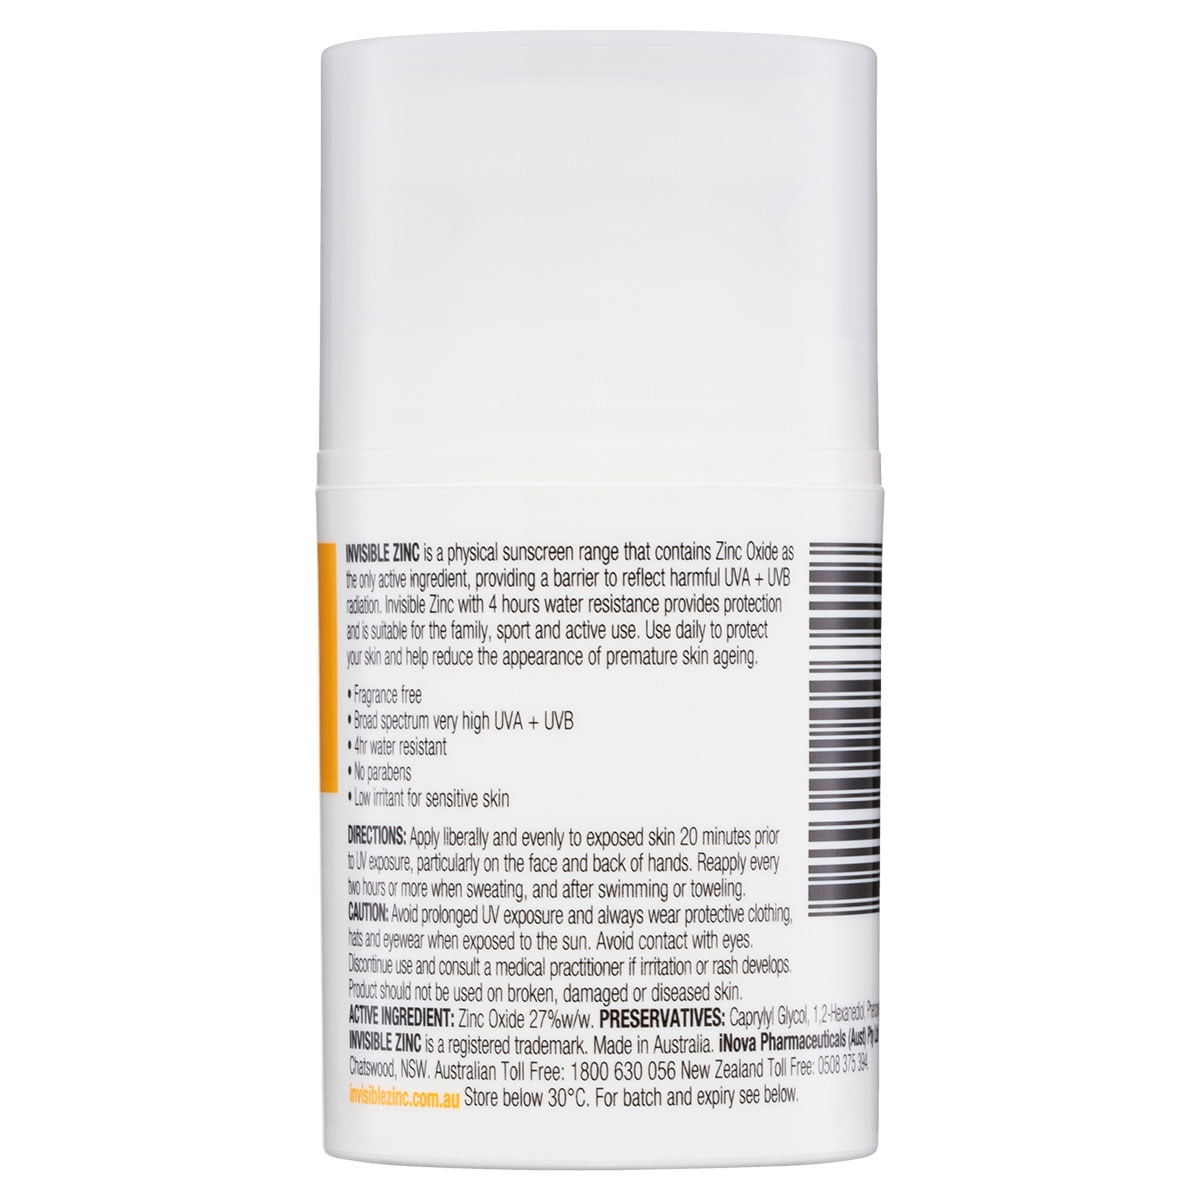 Invisible Zinc Sunscreen 4 Hour Water Resistant SPF50+ 50ml